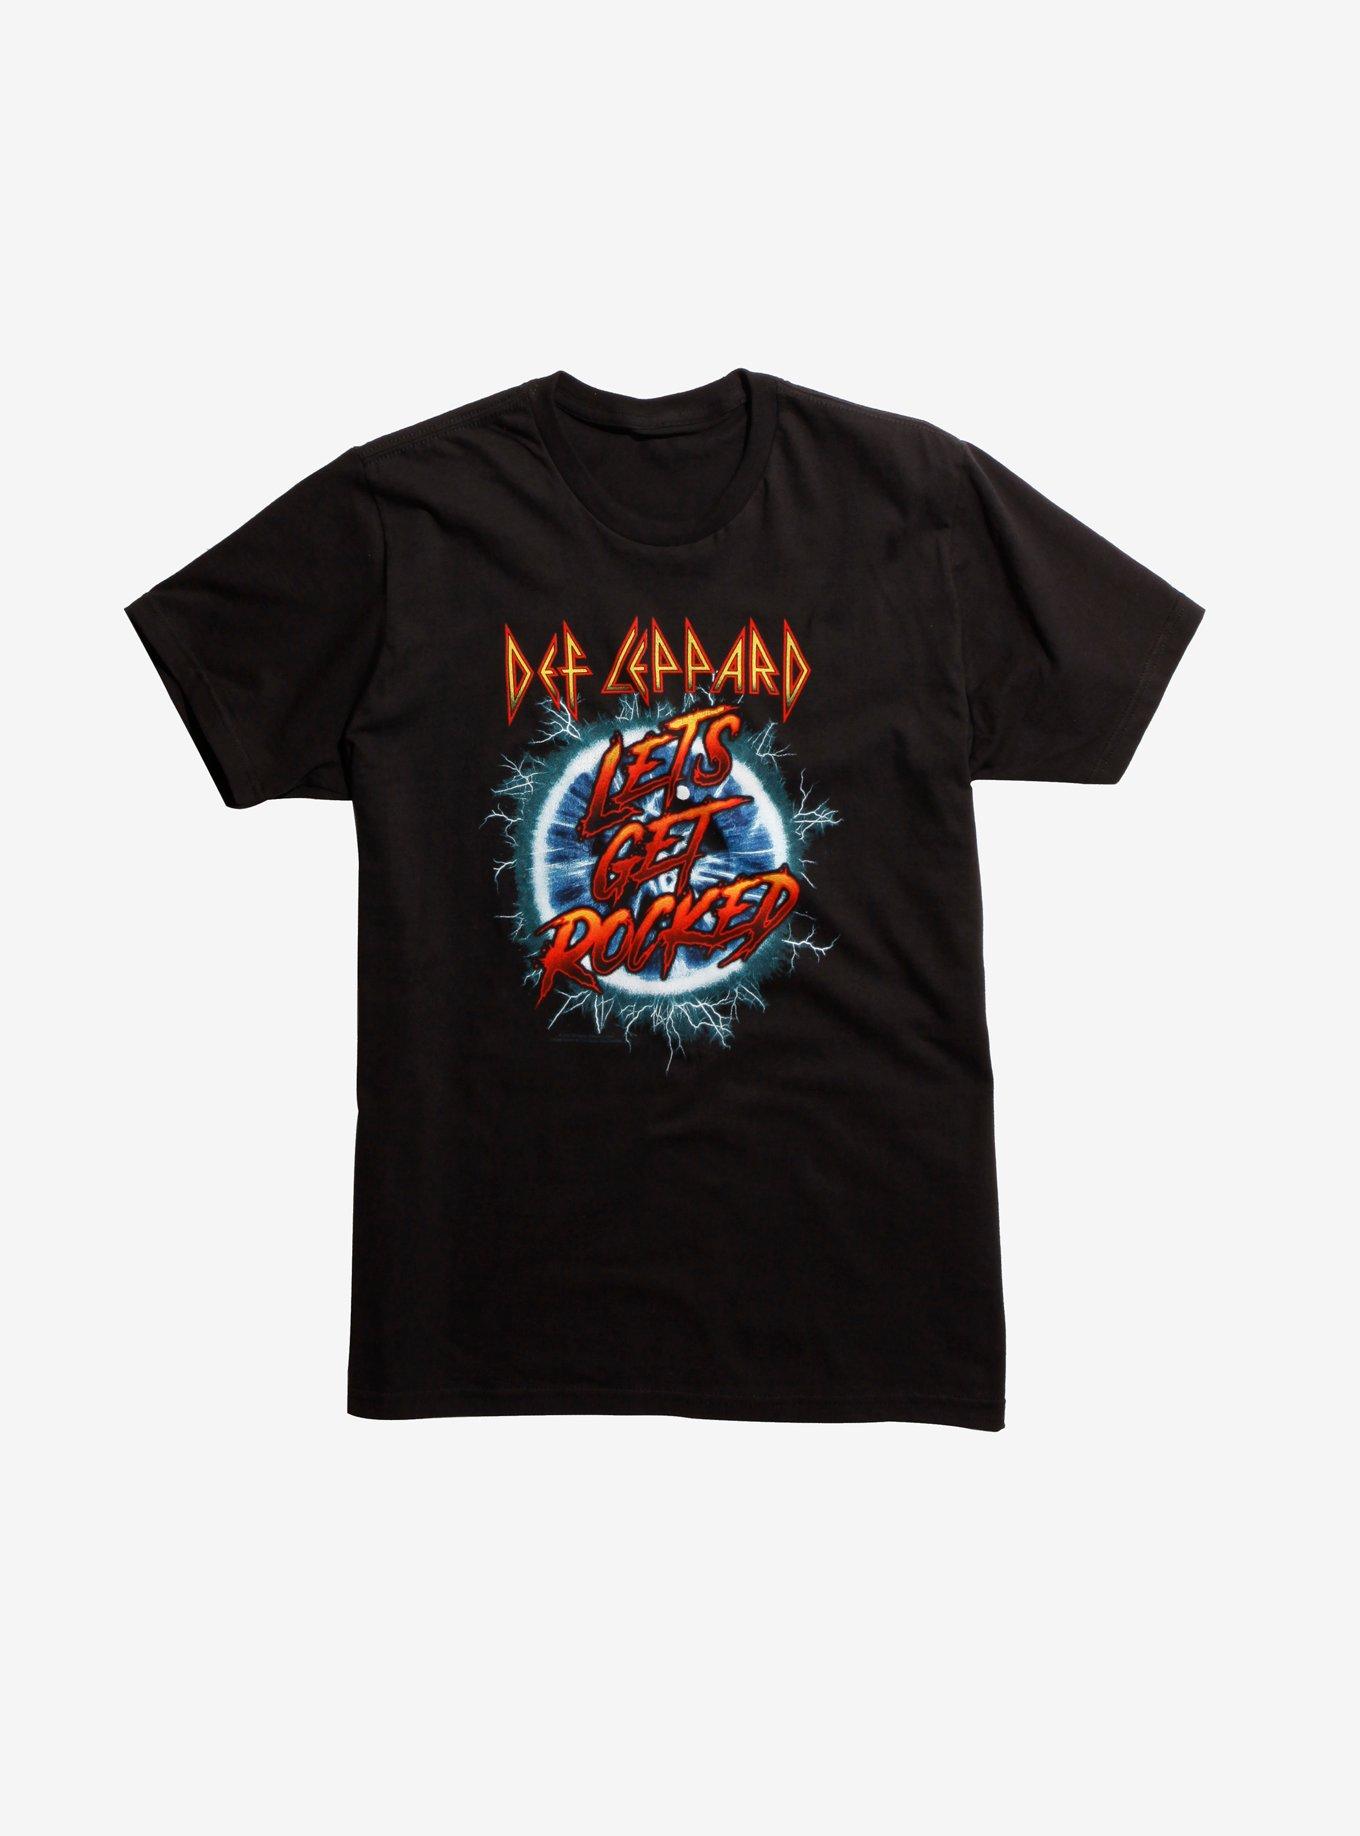 Def Leppard Let's Get Rocked T-Shirt | Hot Topic